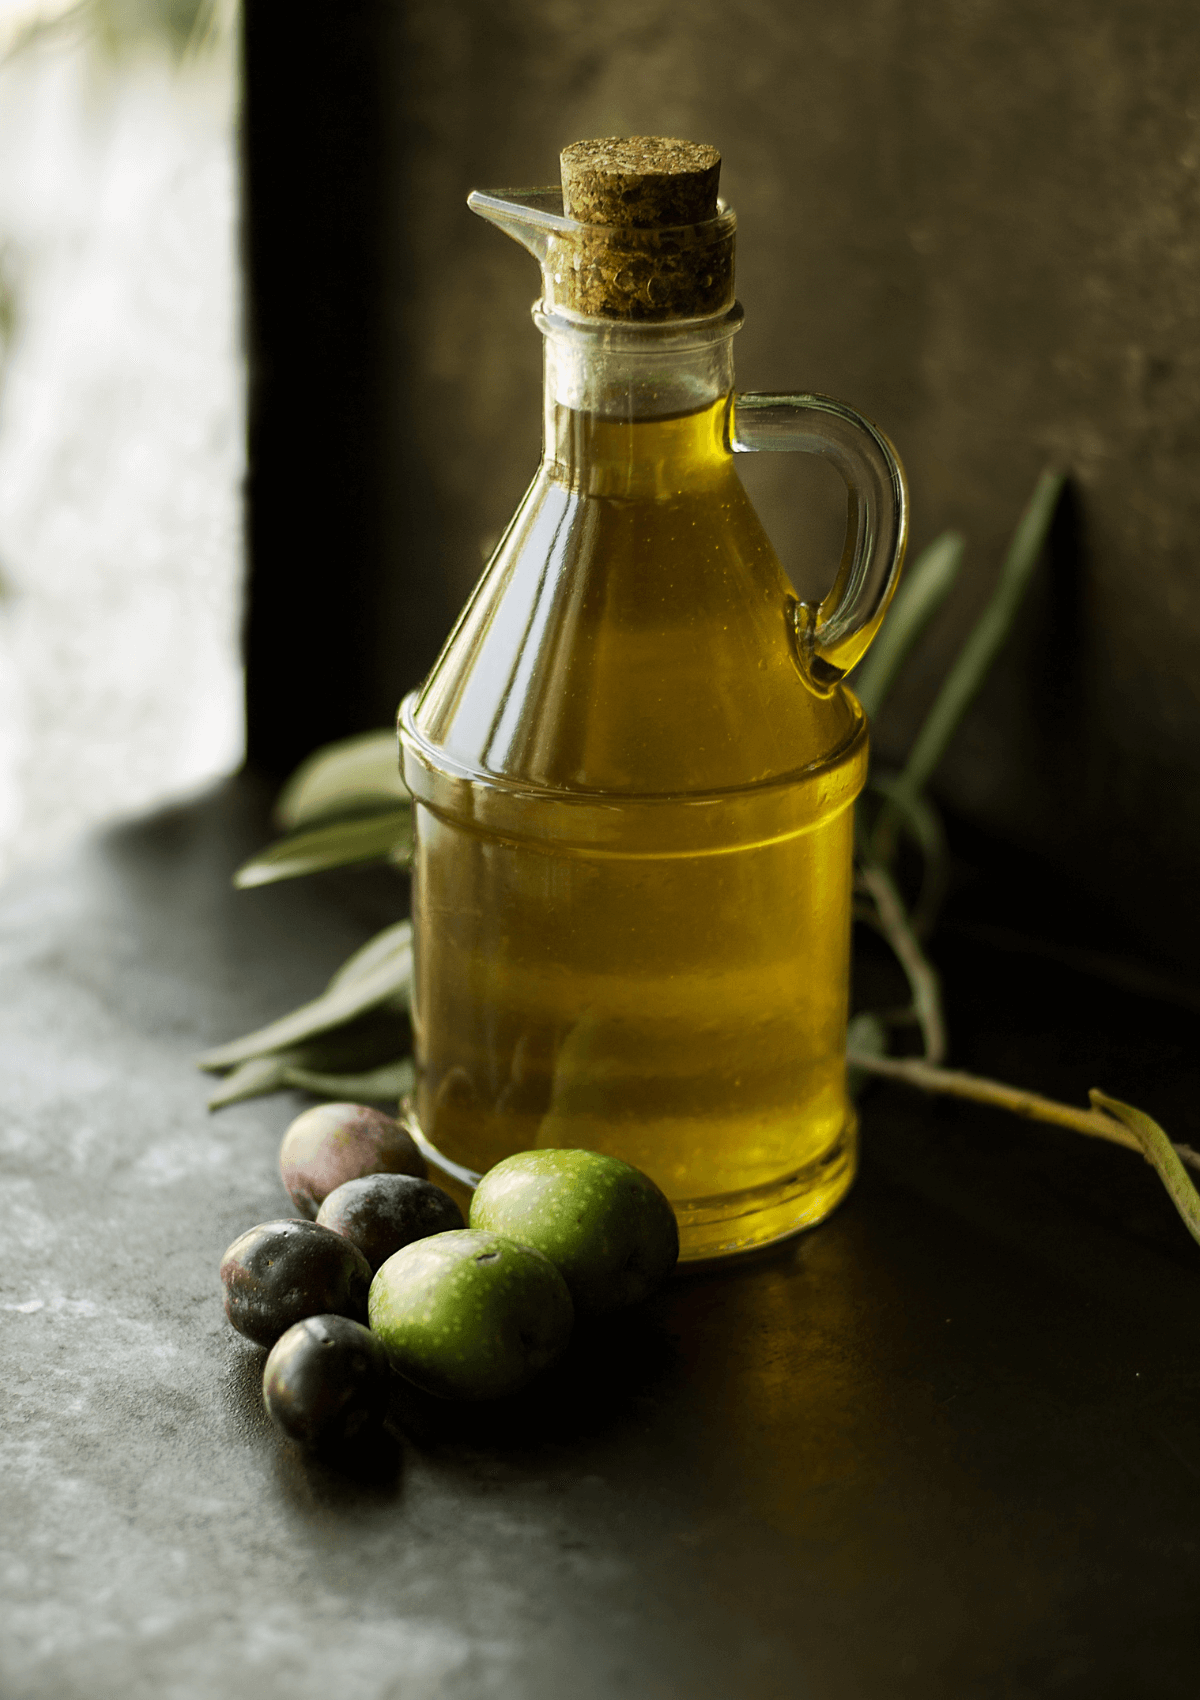 local olive oil from Jordan makes a great memento for foodies from your trip